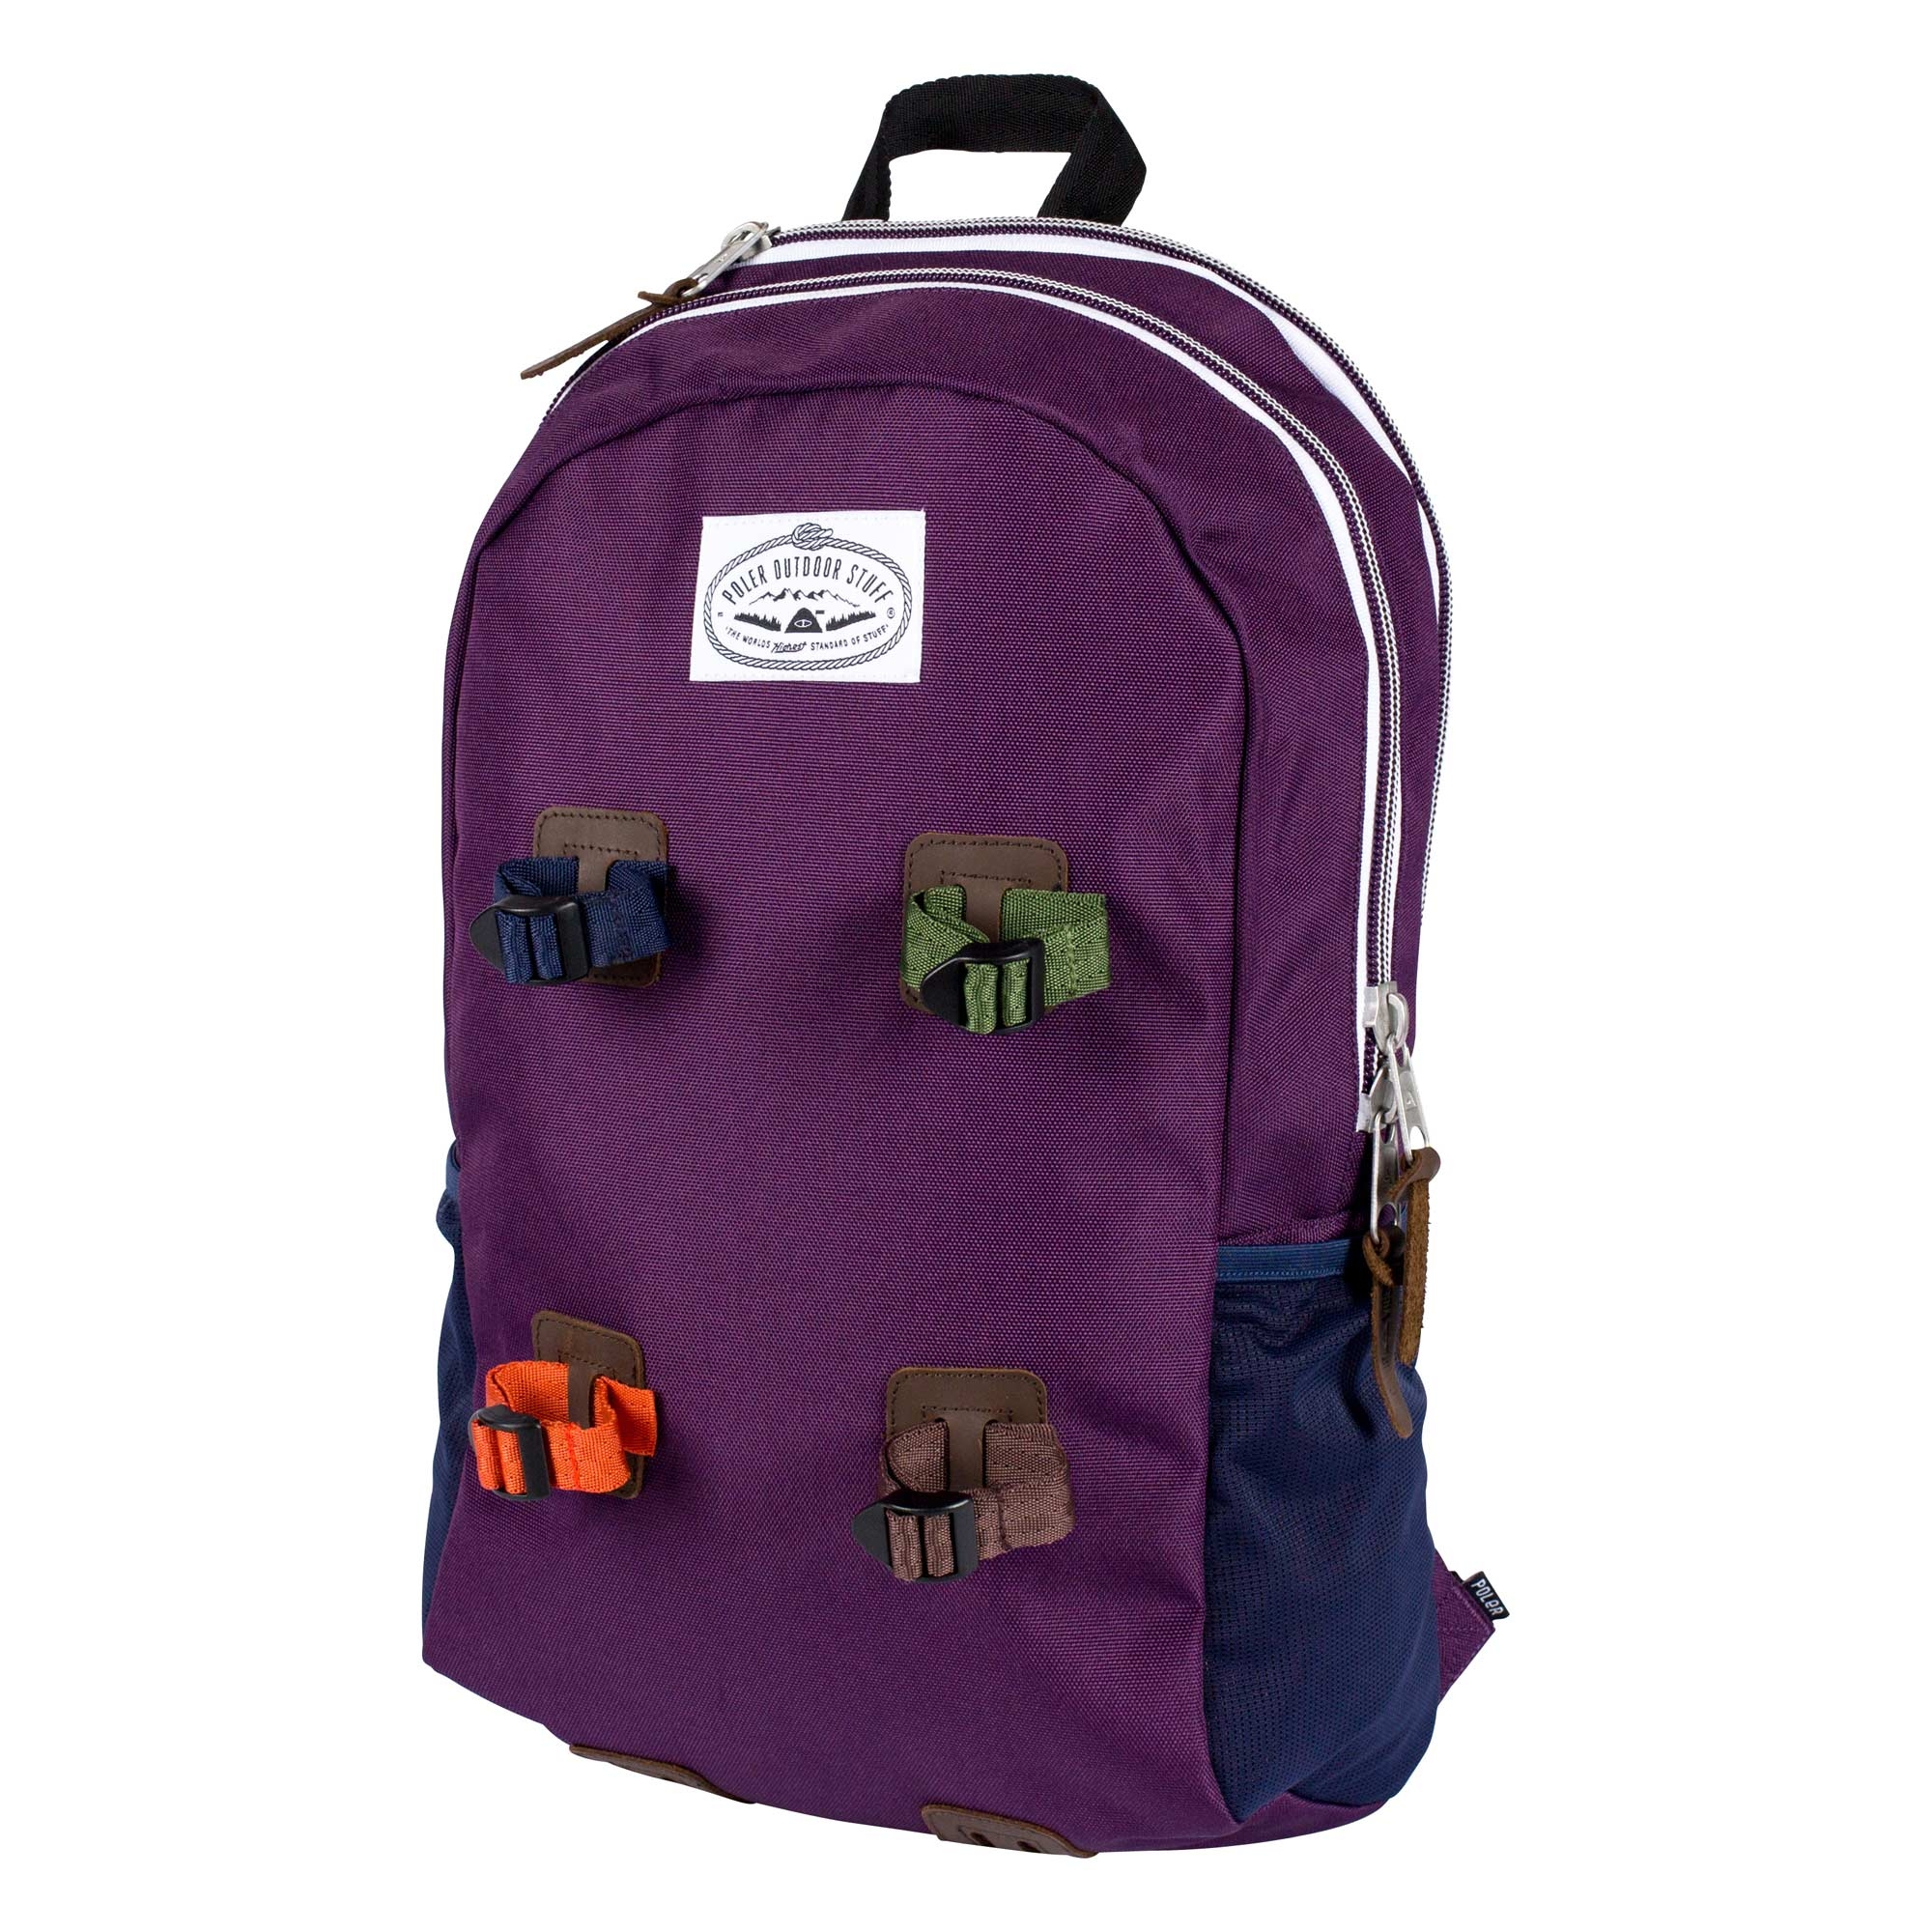 POLER Bag CLASSIC DAY PACK, purple